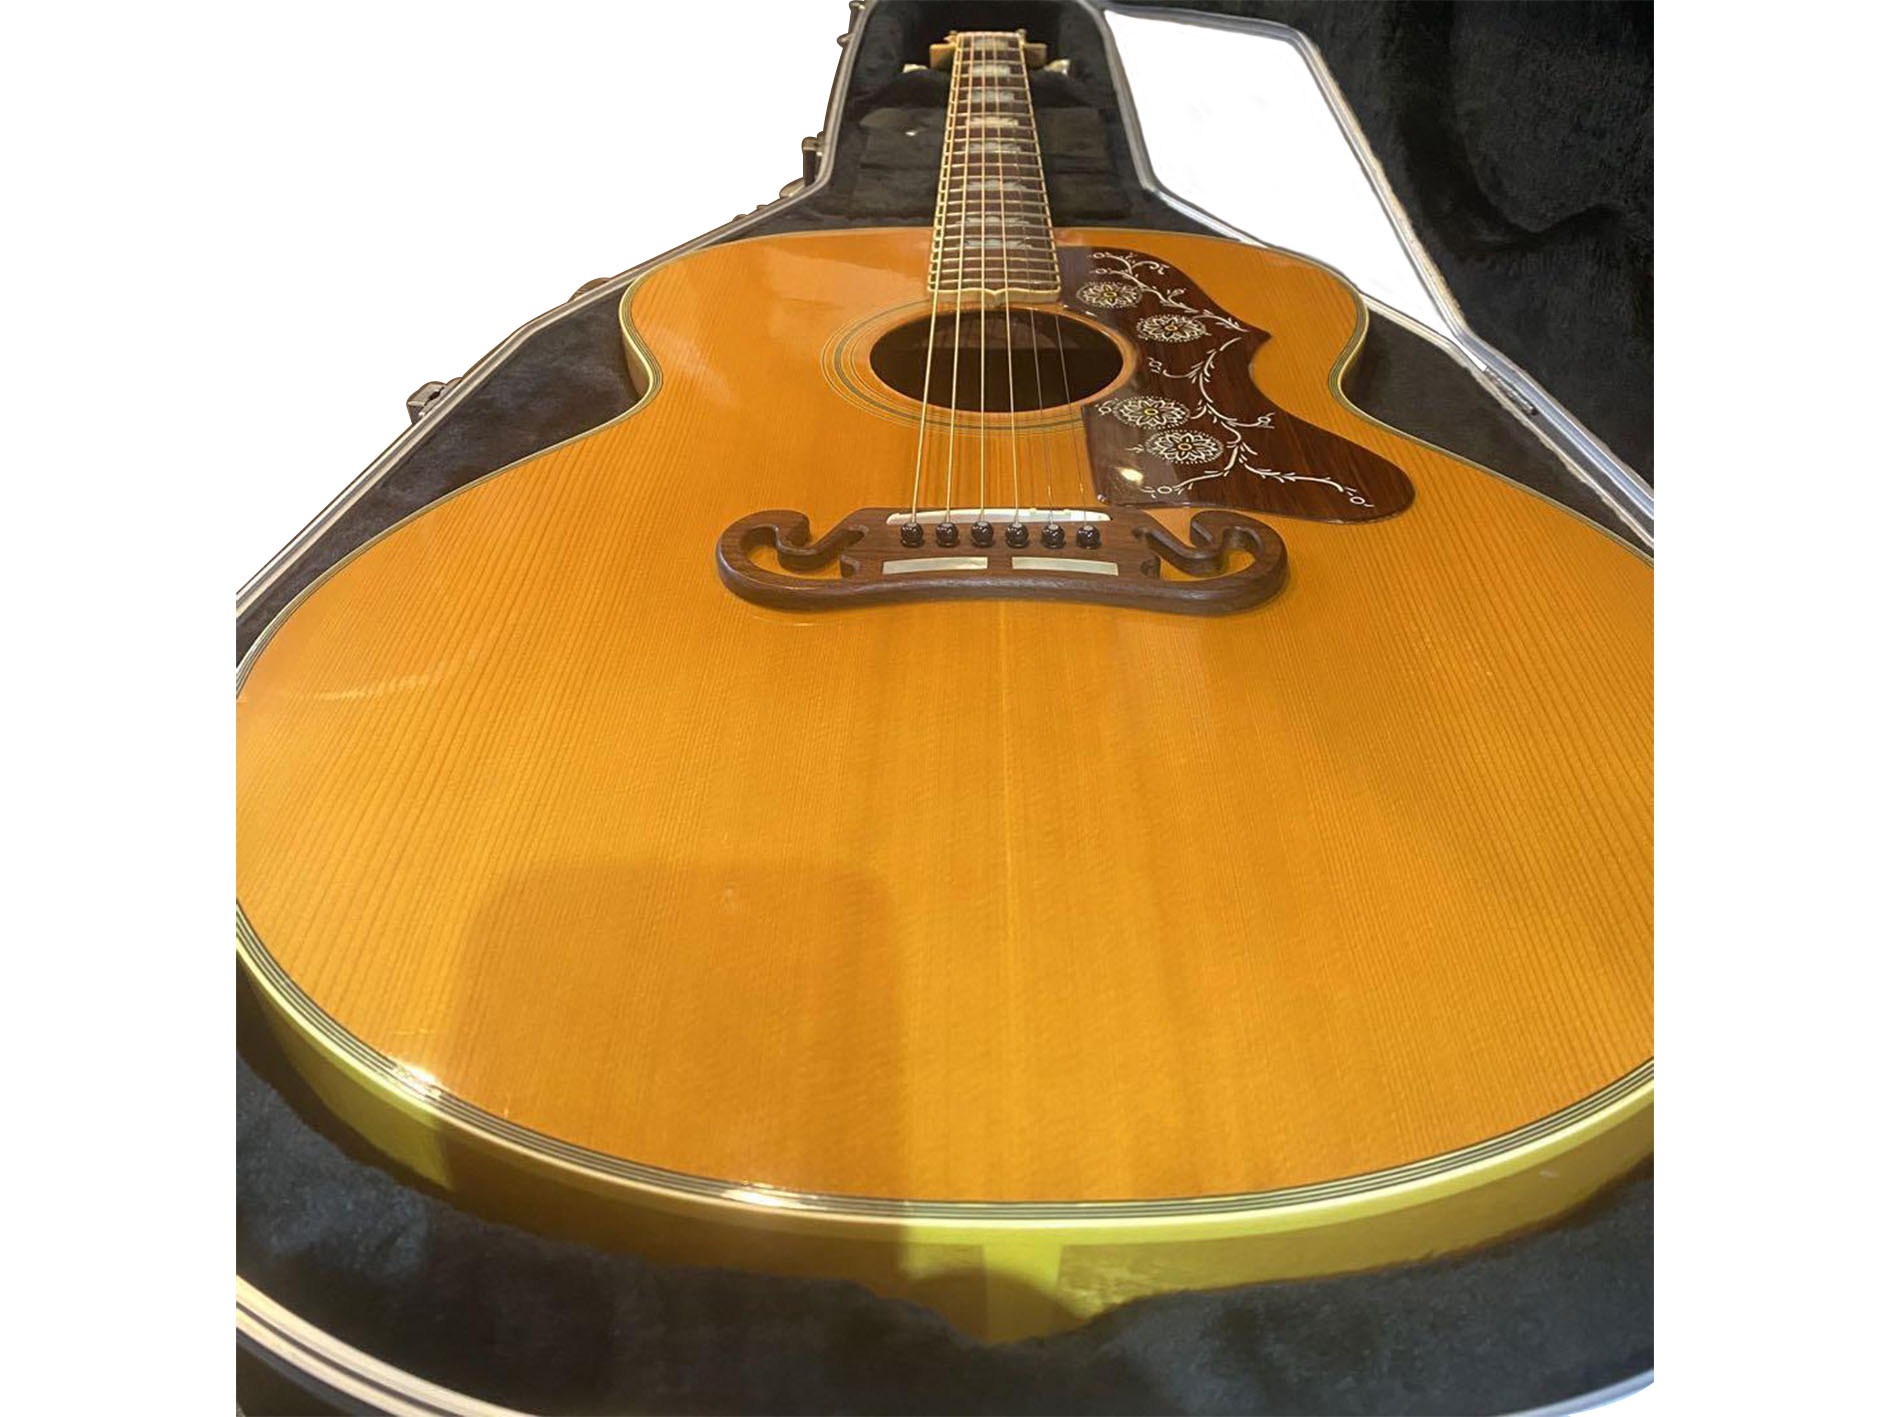 1991 J200 ACOUSTIC GUITAR as same of the pictures 00